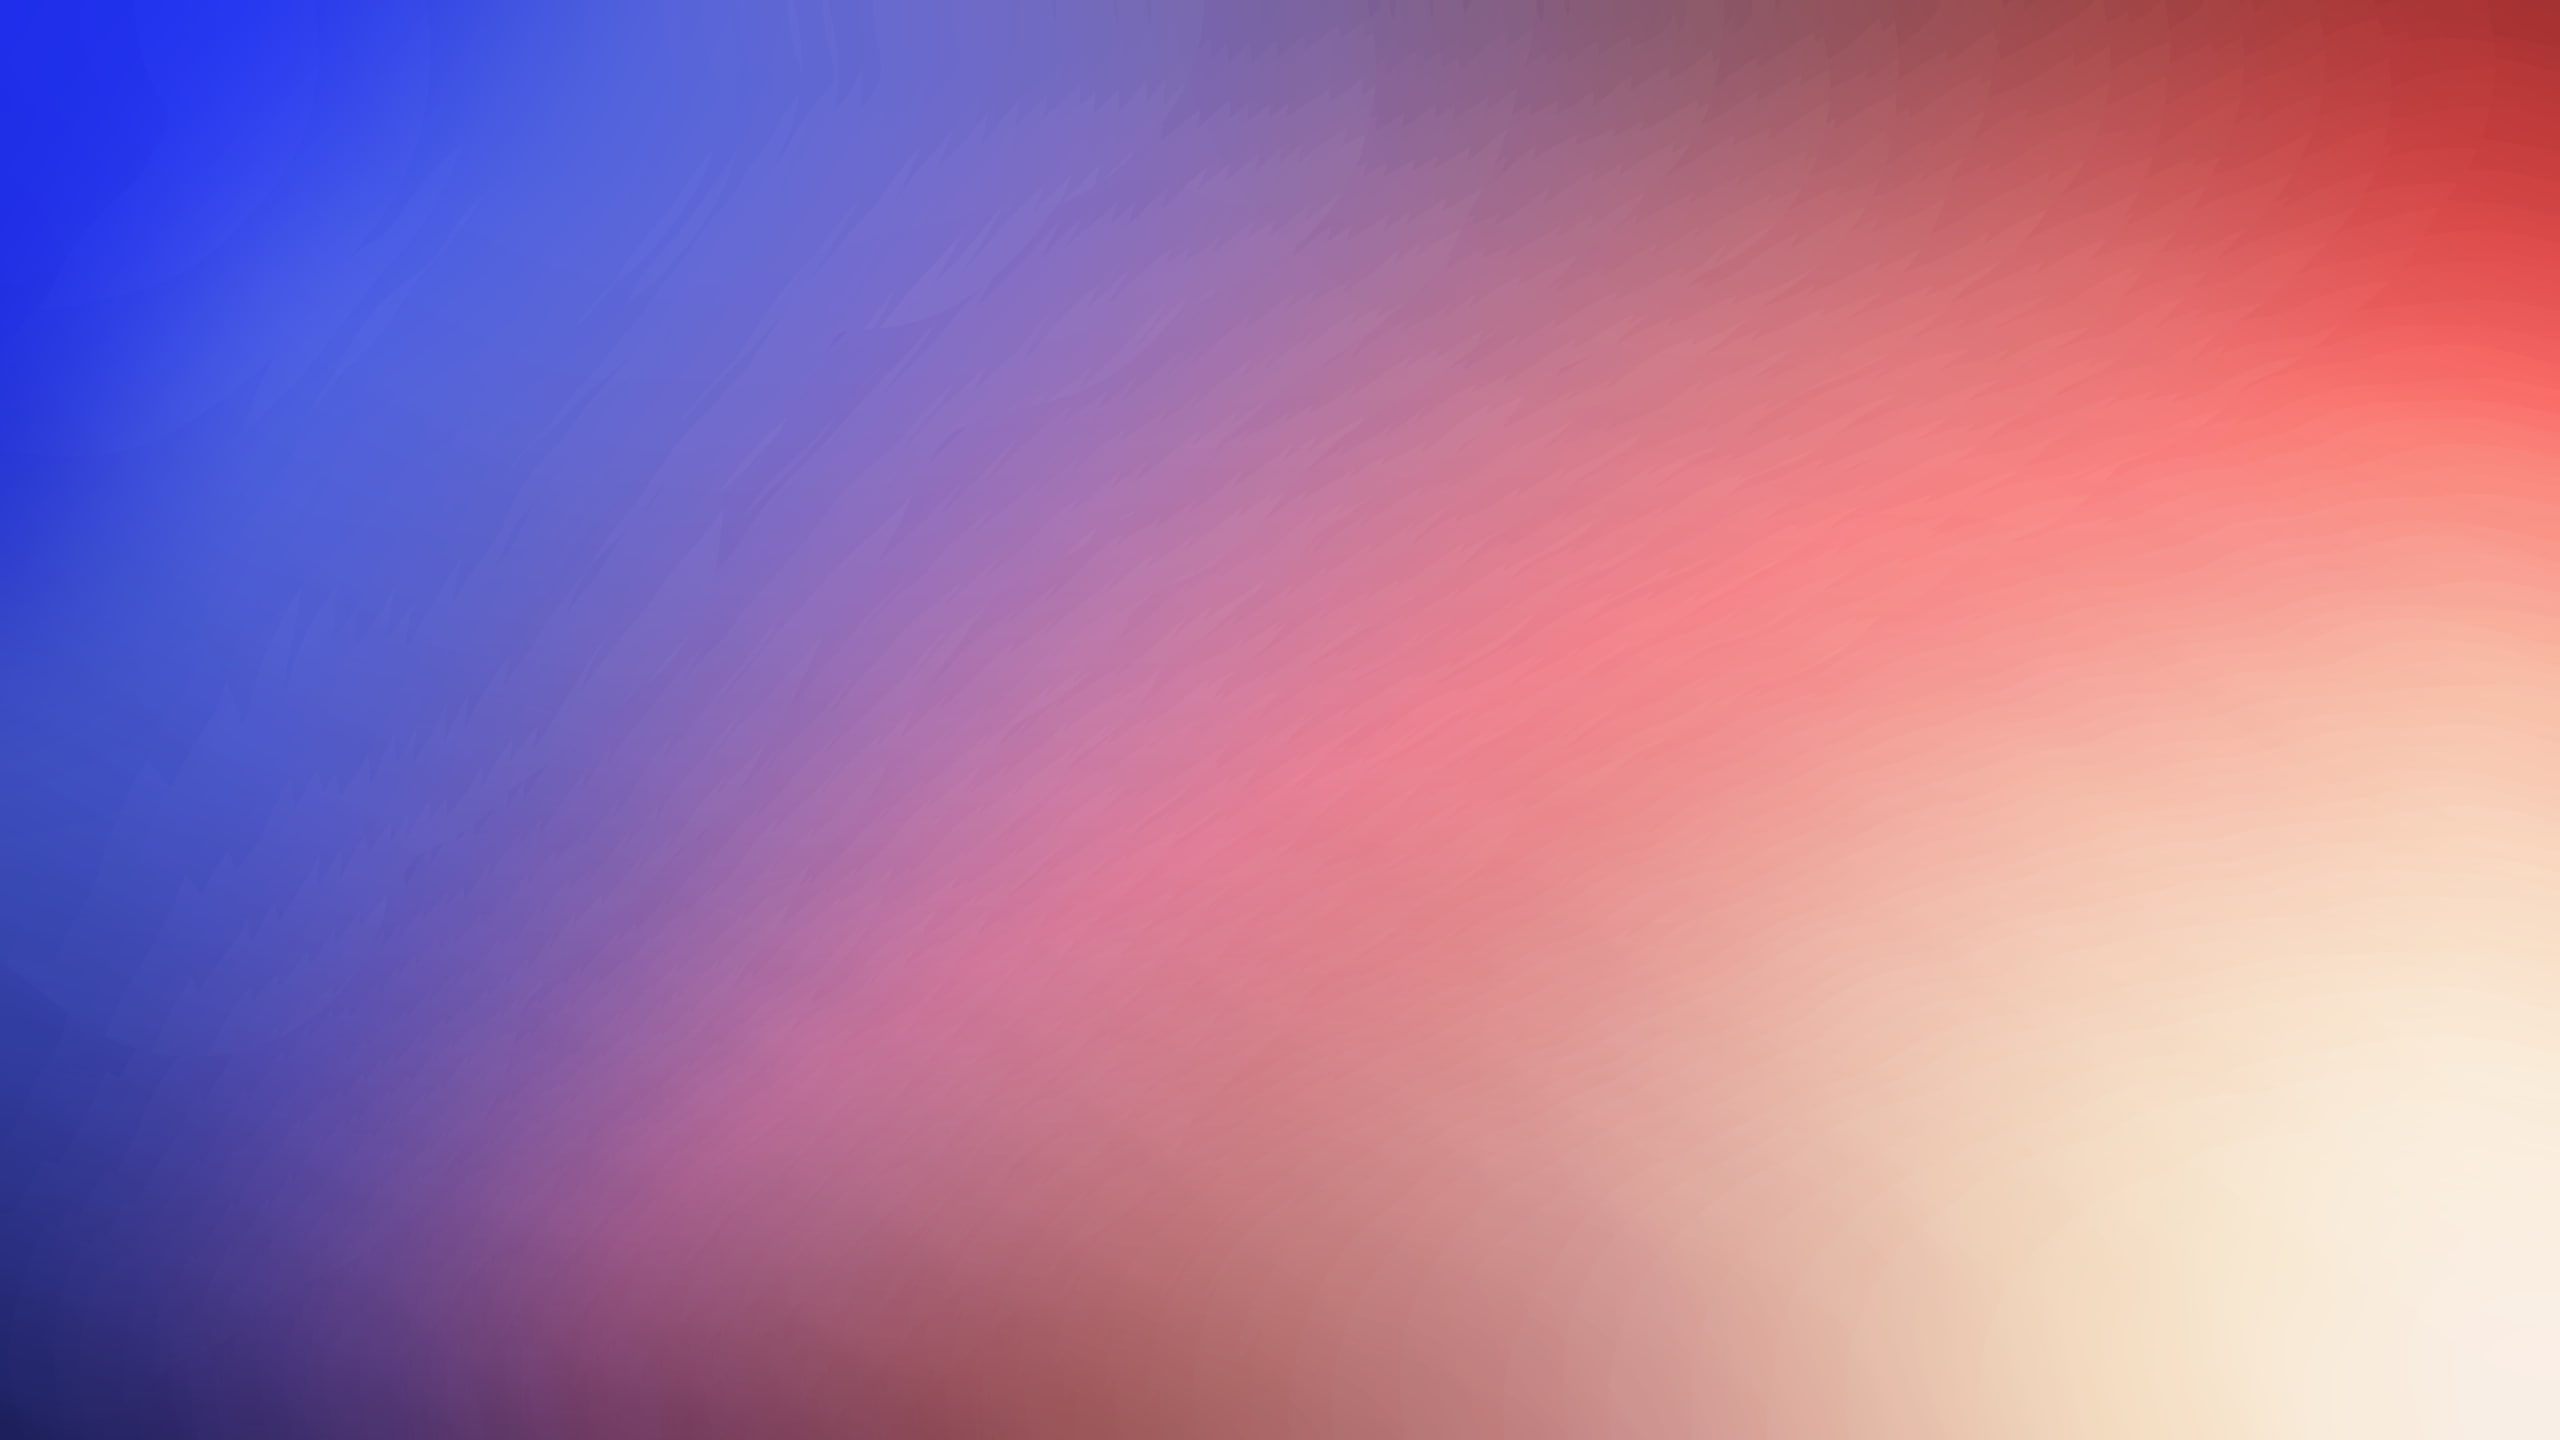 colorful, abstract, simple, backgrounds, blue, no people, multi colored